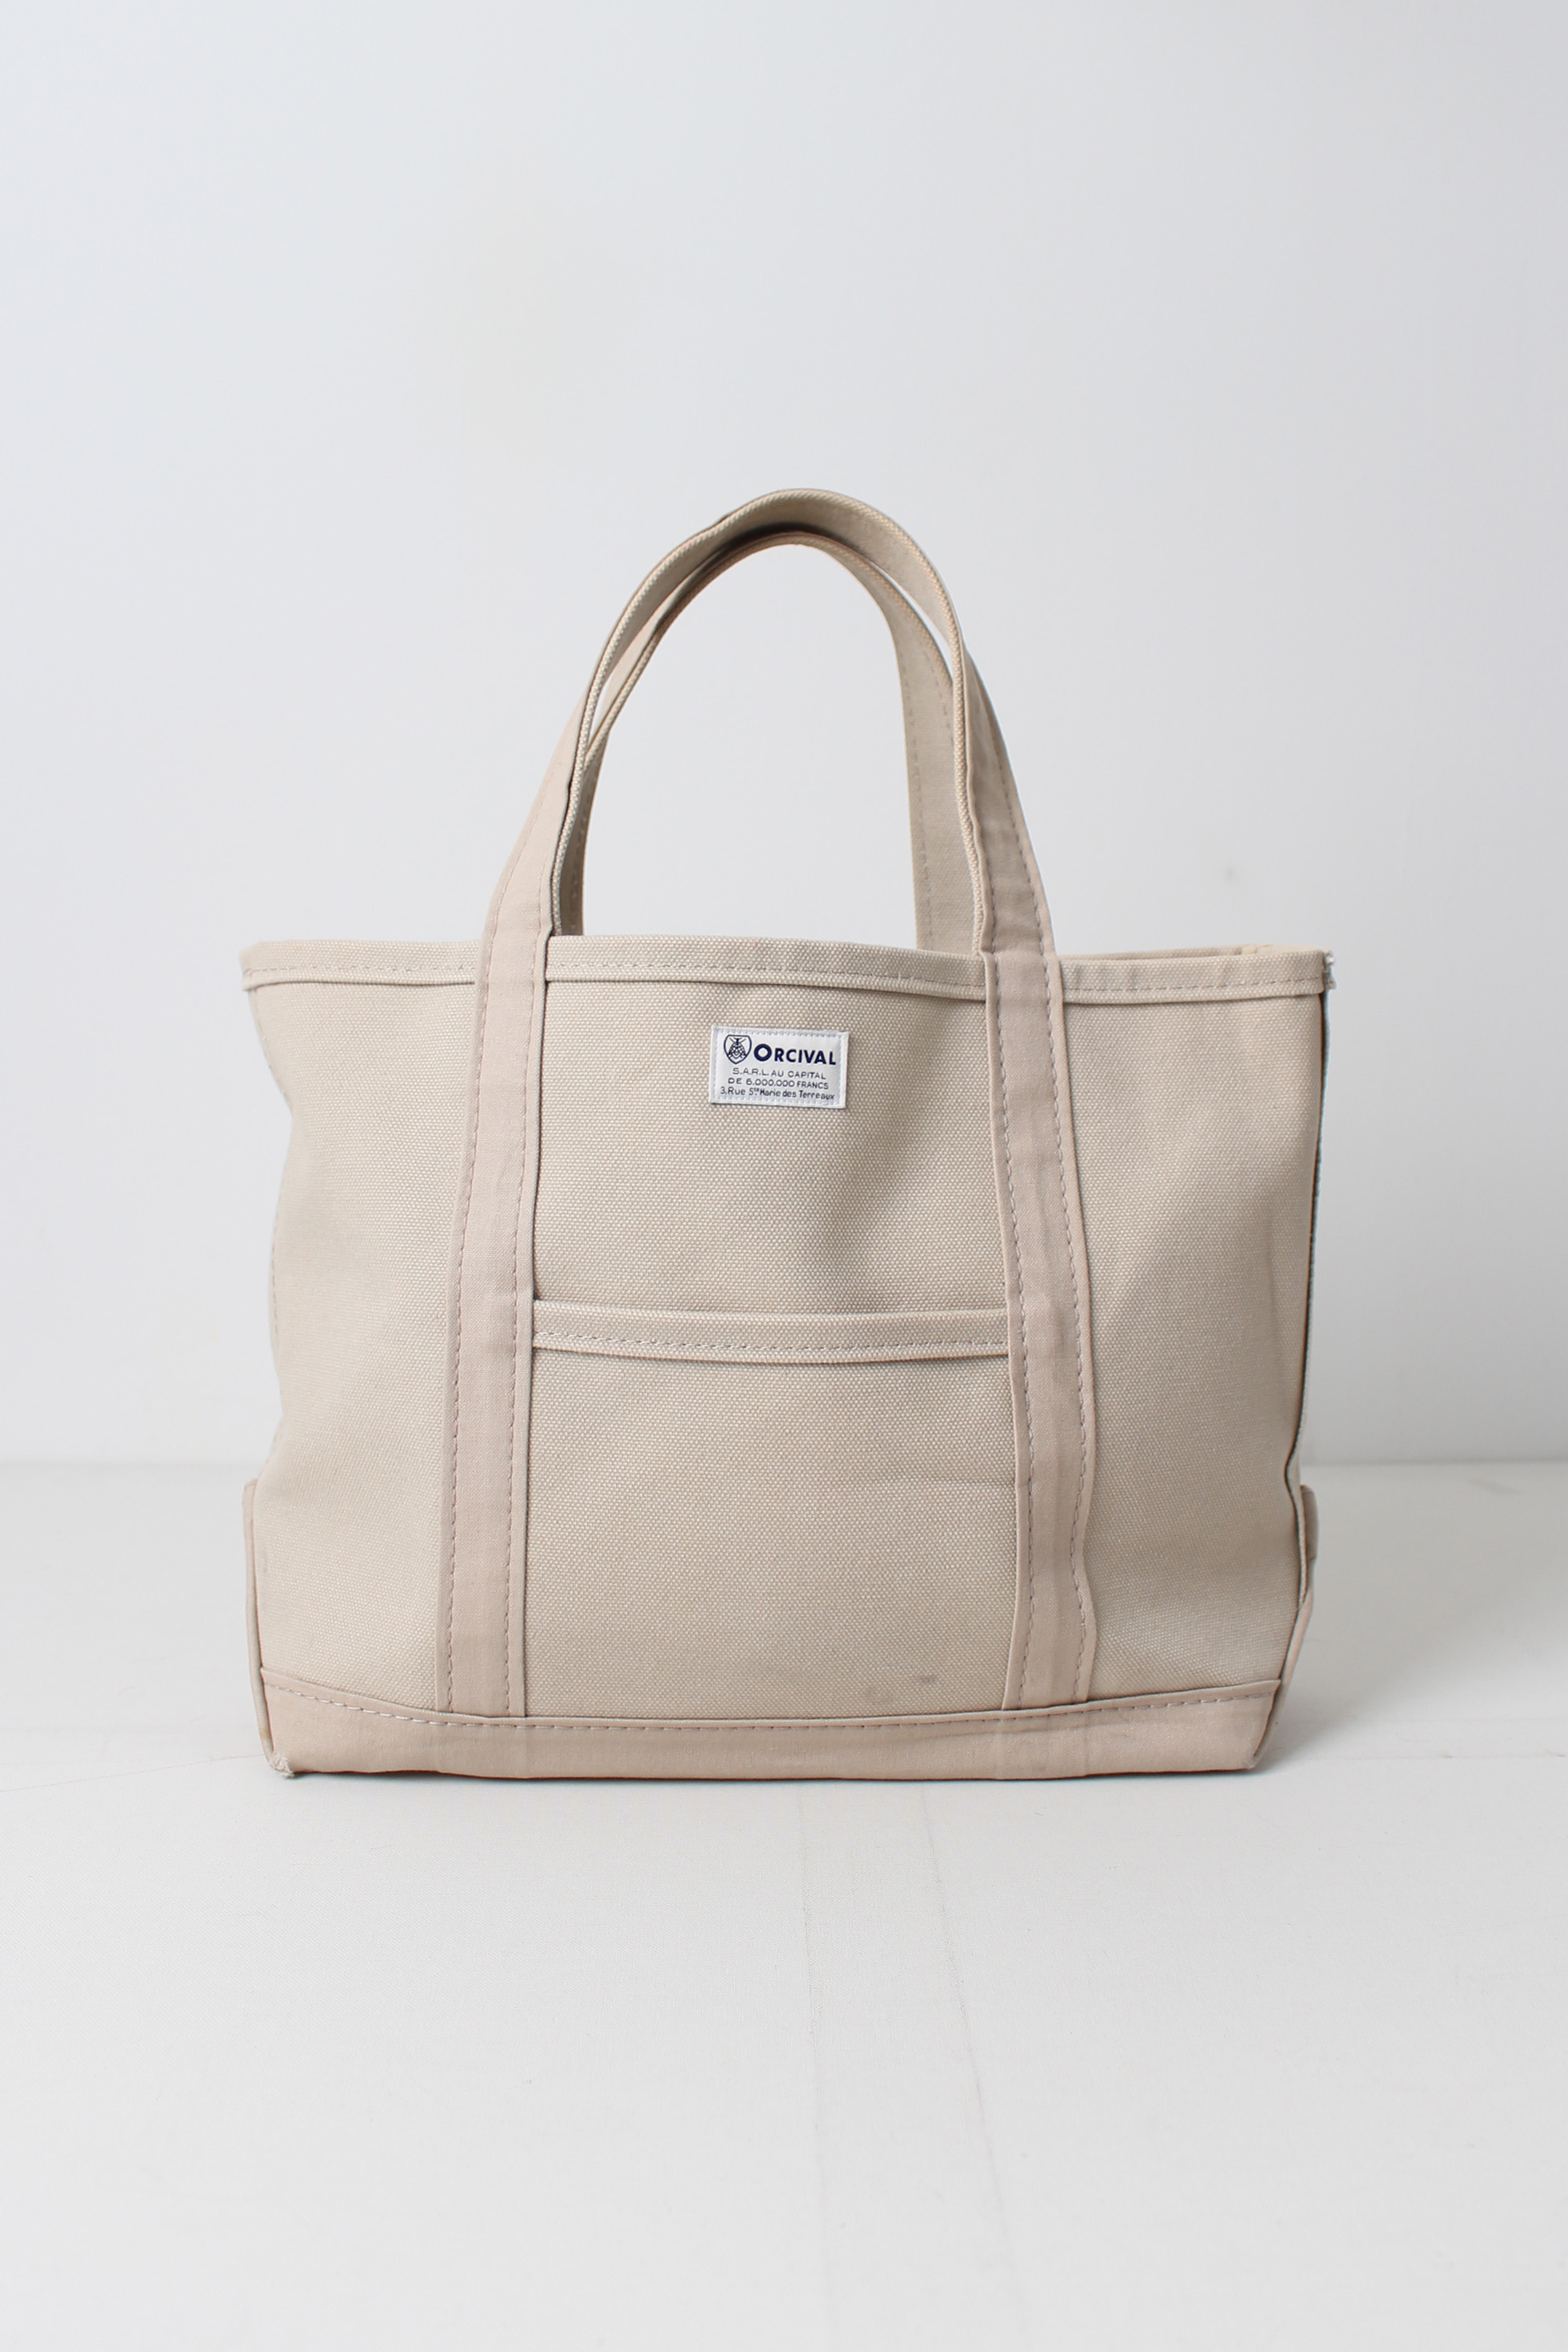 ORCIVAL tote bag